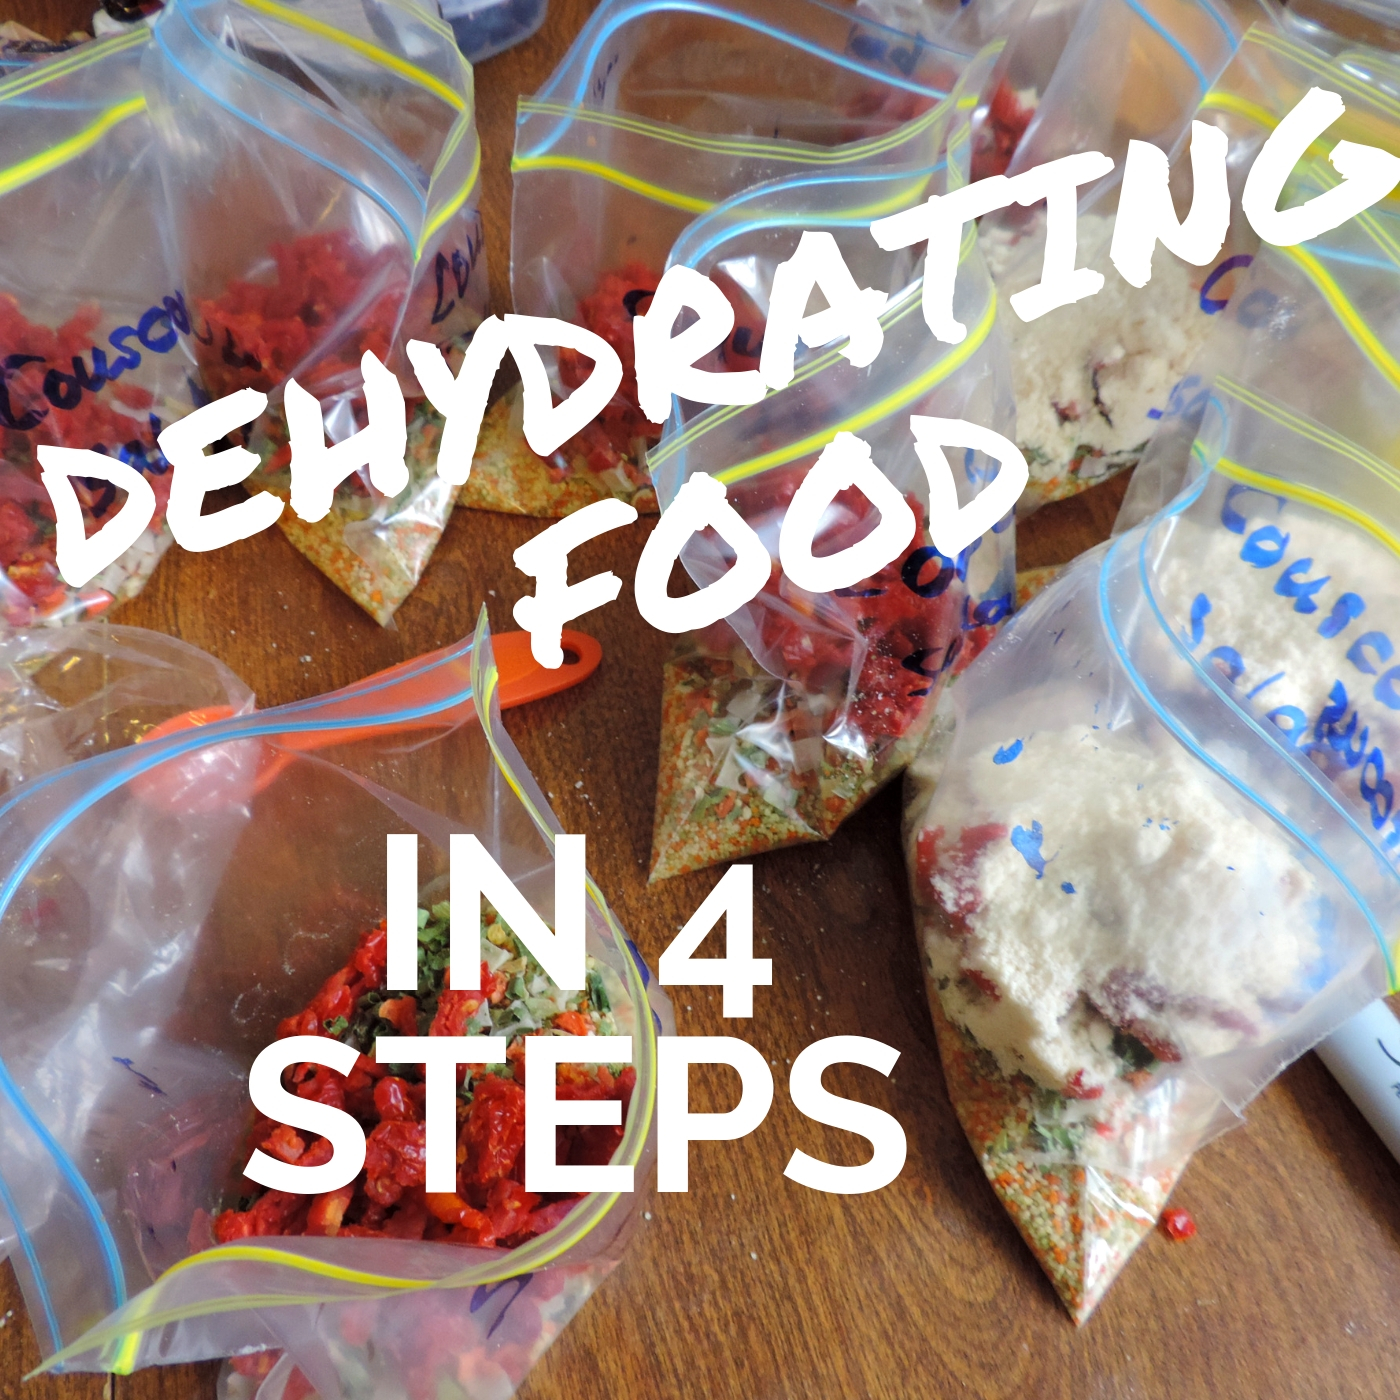 Dehydrating food in 4 easy steps, backcountry meals, trekking food, dehydrating, Wildly Intrepid